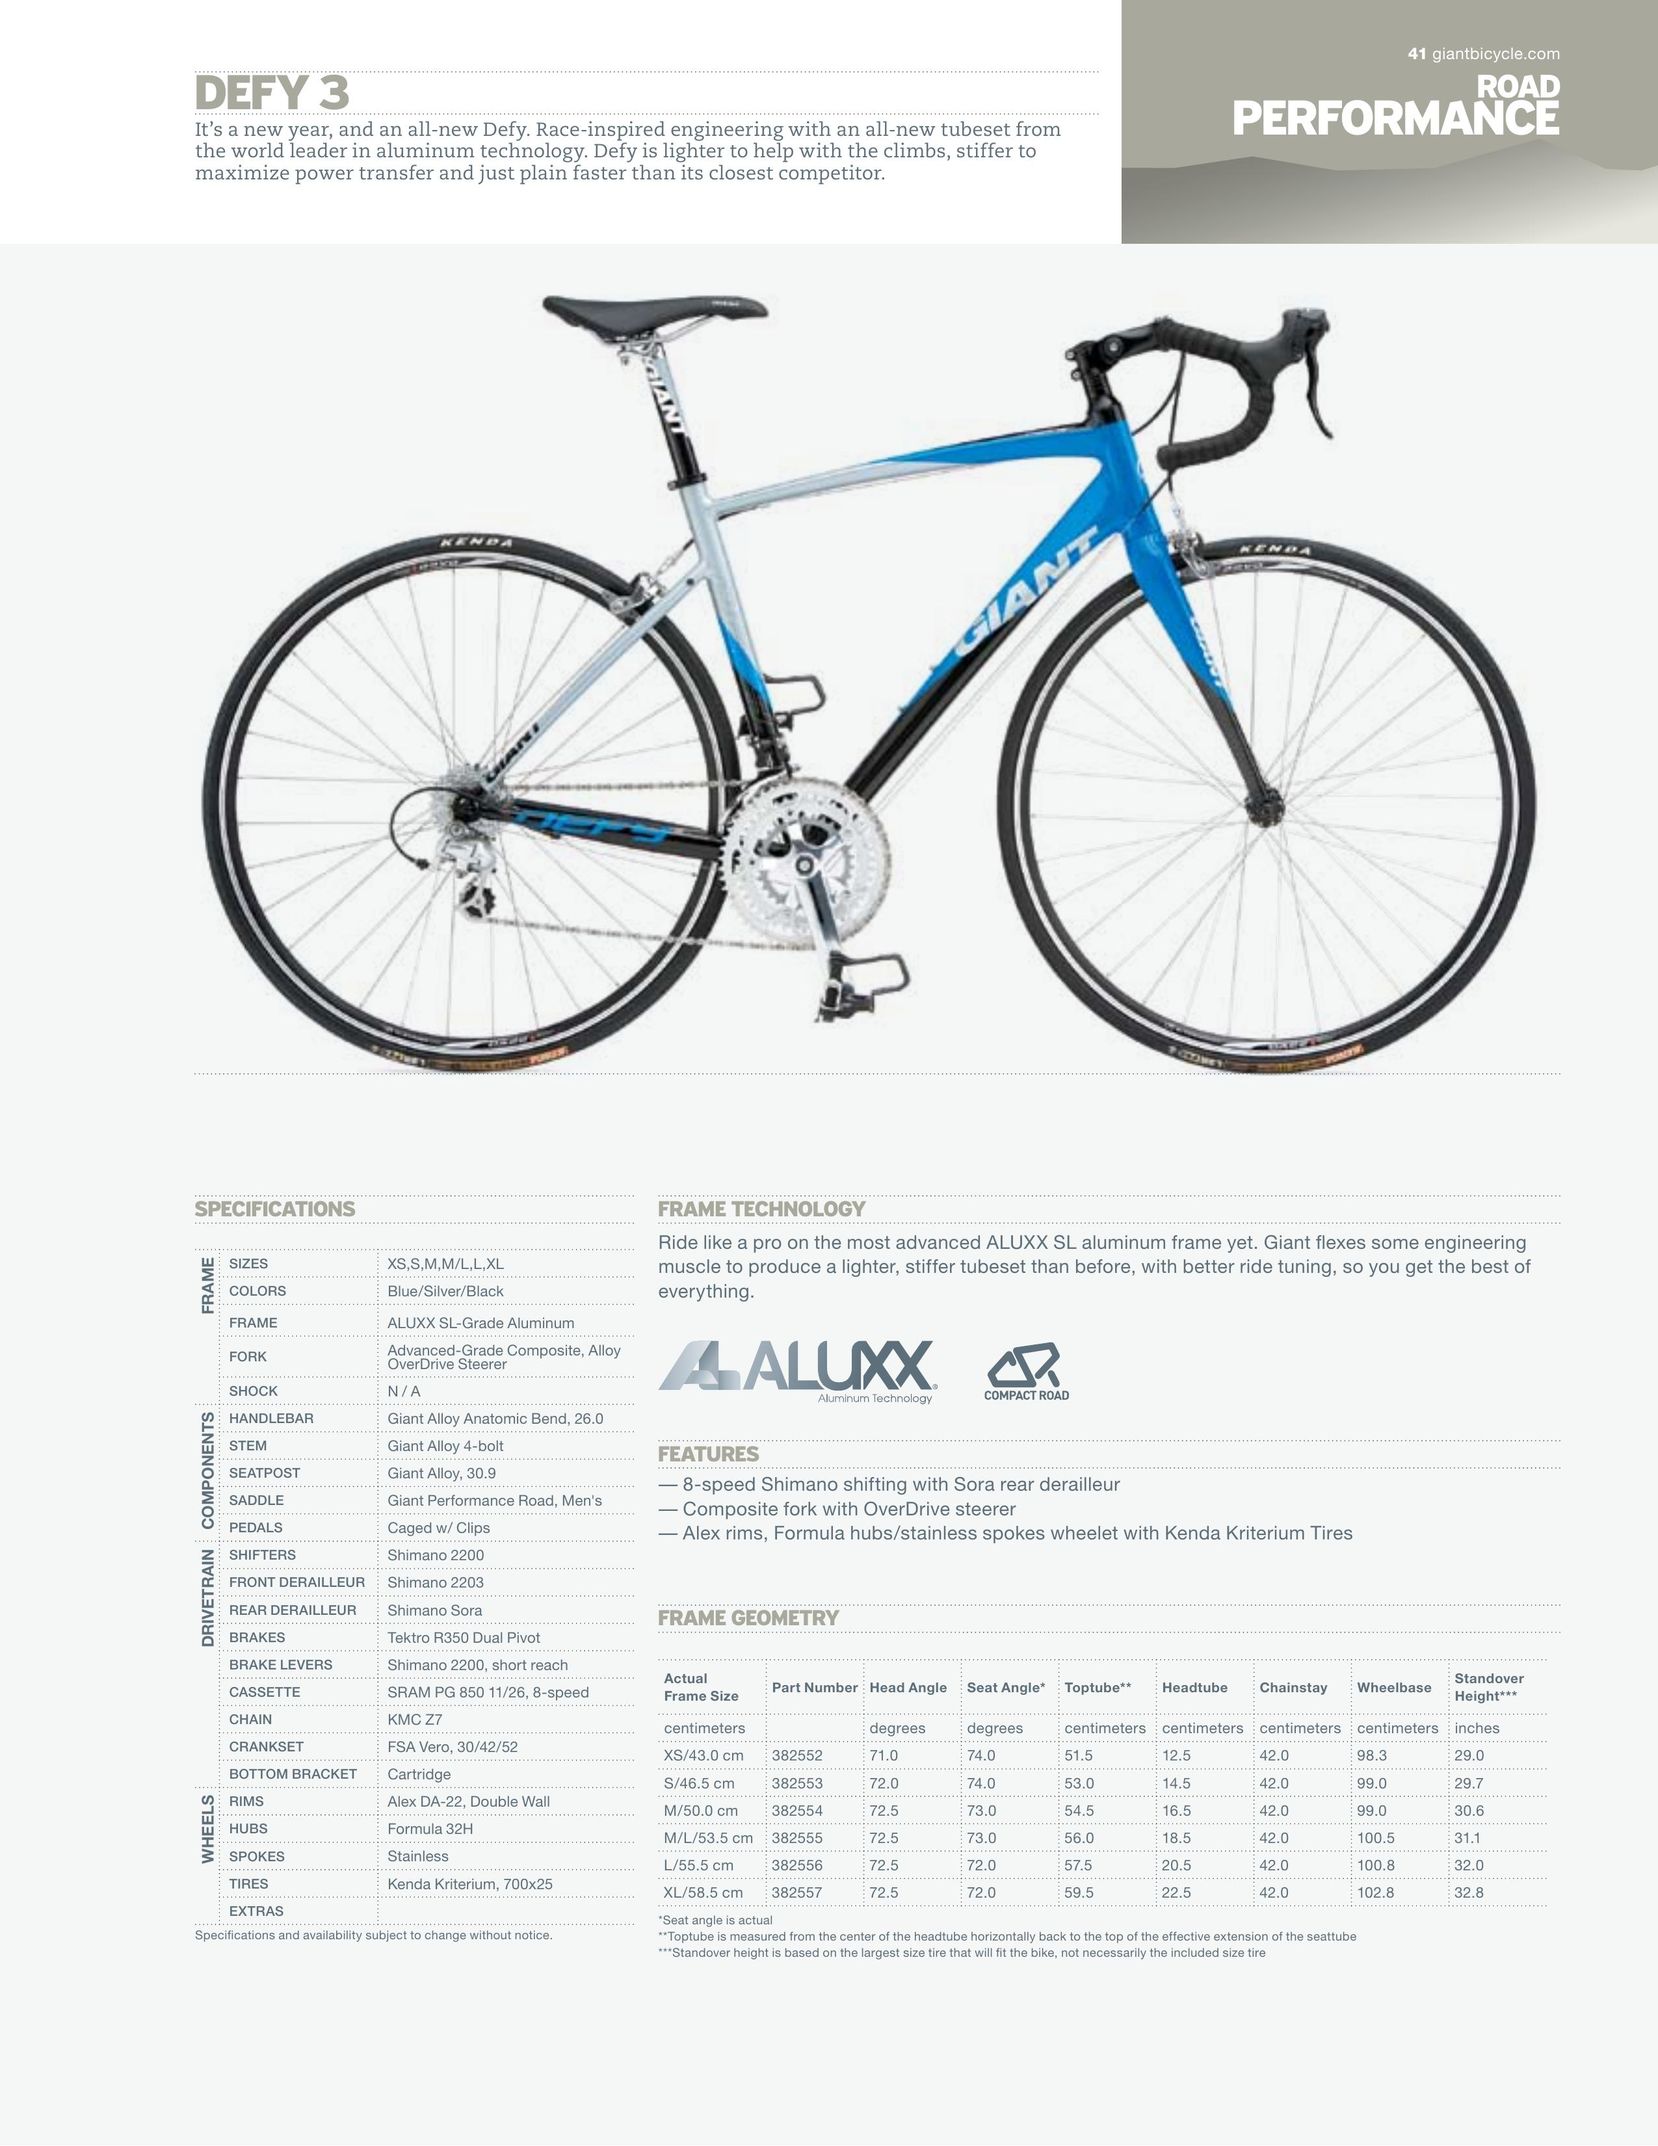 Giant Defy 3 Bicycle User Manual